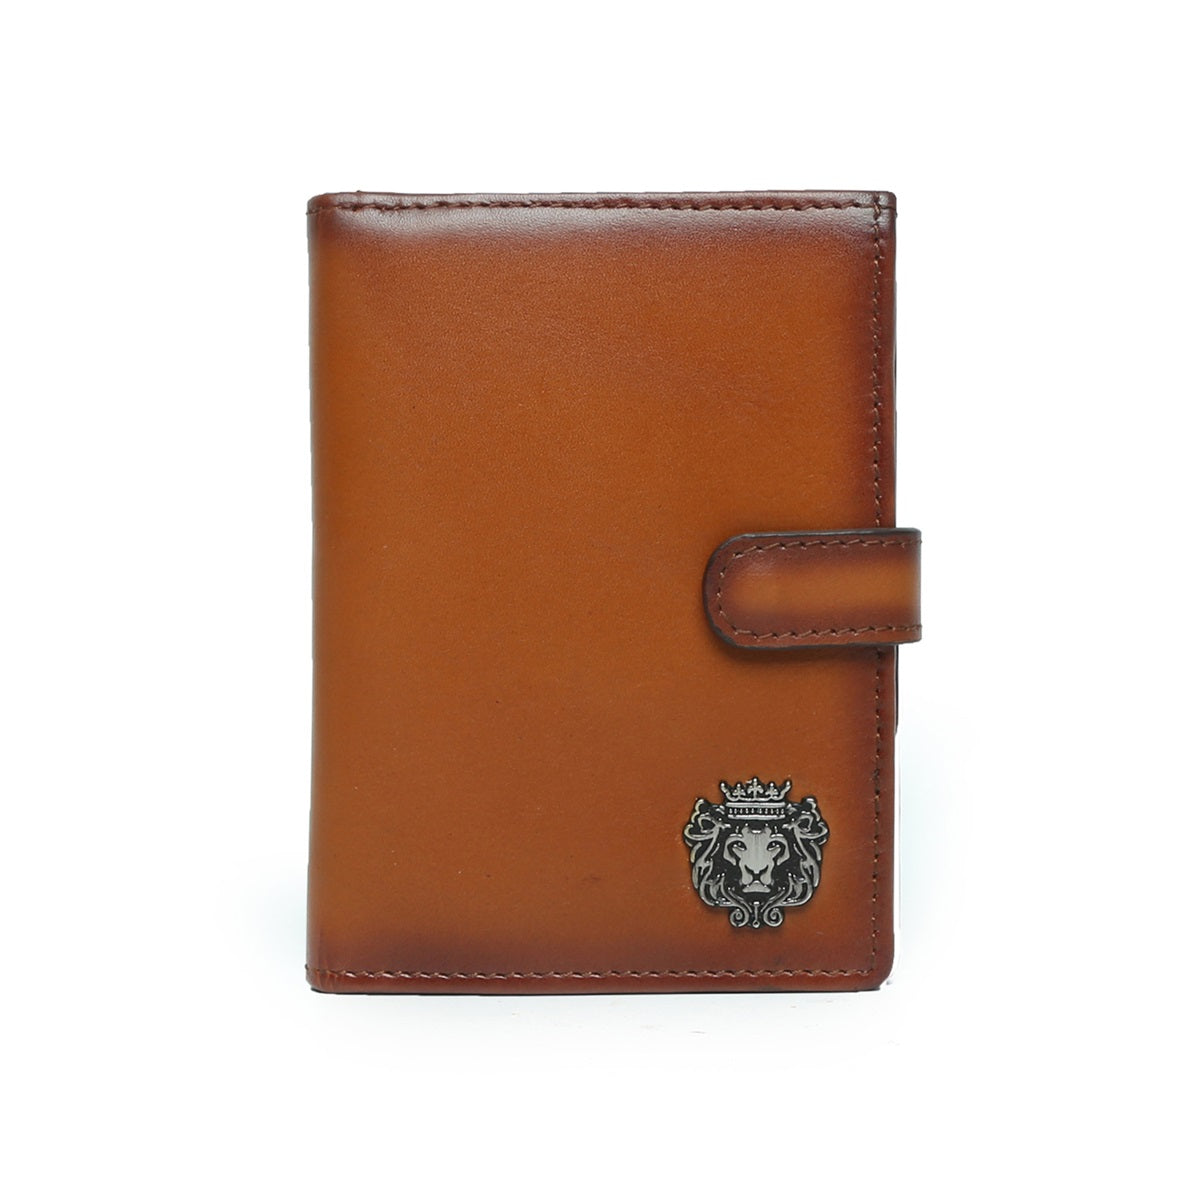 Tan Leather Passport Holder with Foldable Boarding Pass Pocket By Brune & Bareskin